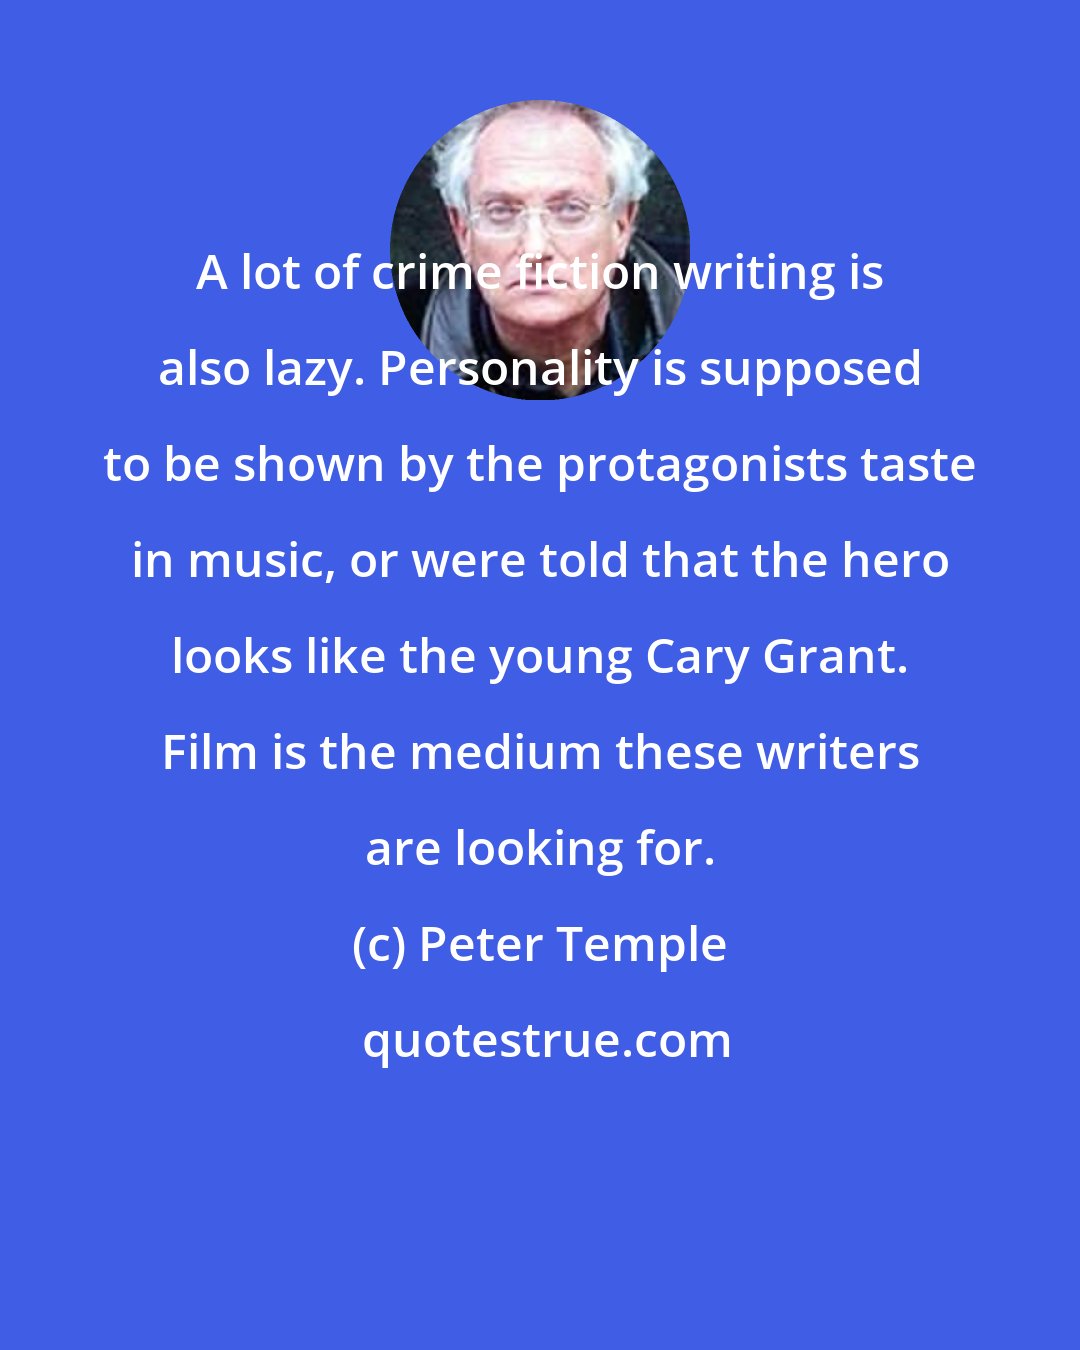 Peter Temple: A lot of crime fiction writing is also lazy. Personality is supposed to be shown by the protagonists taste in music, or were told that the hero looks like the young Cary Grant. Film is the medium these writers are looking for.